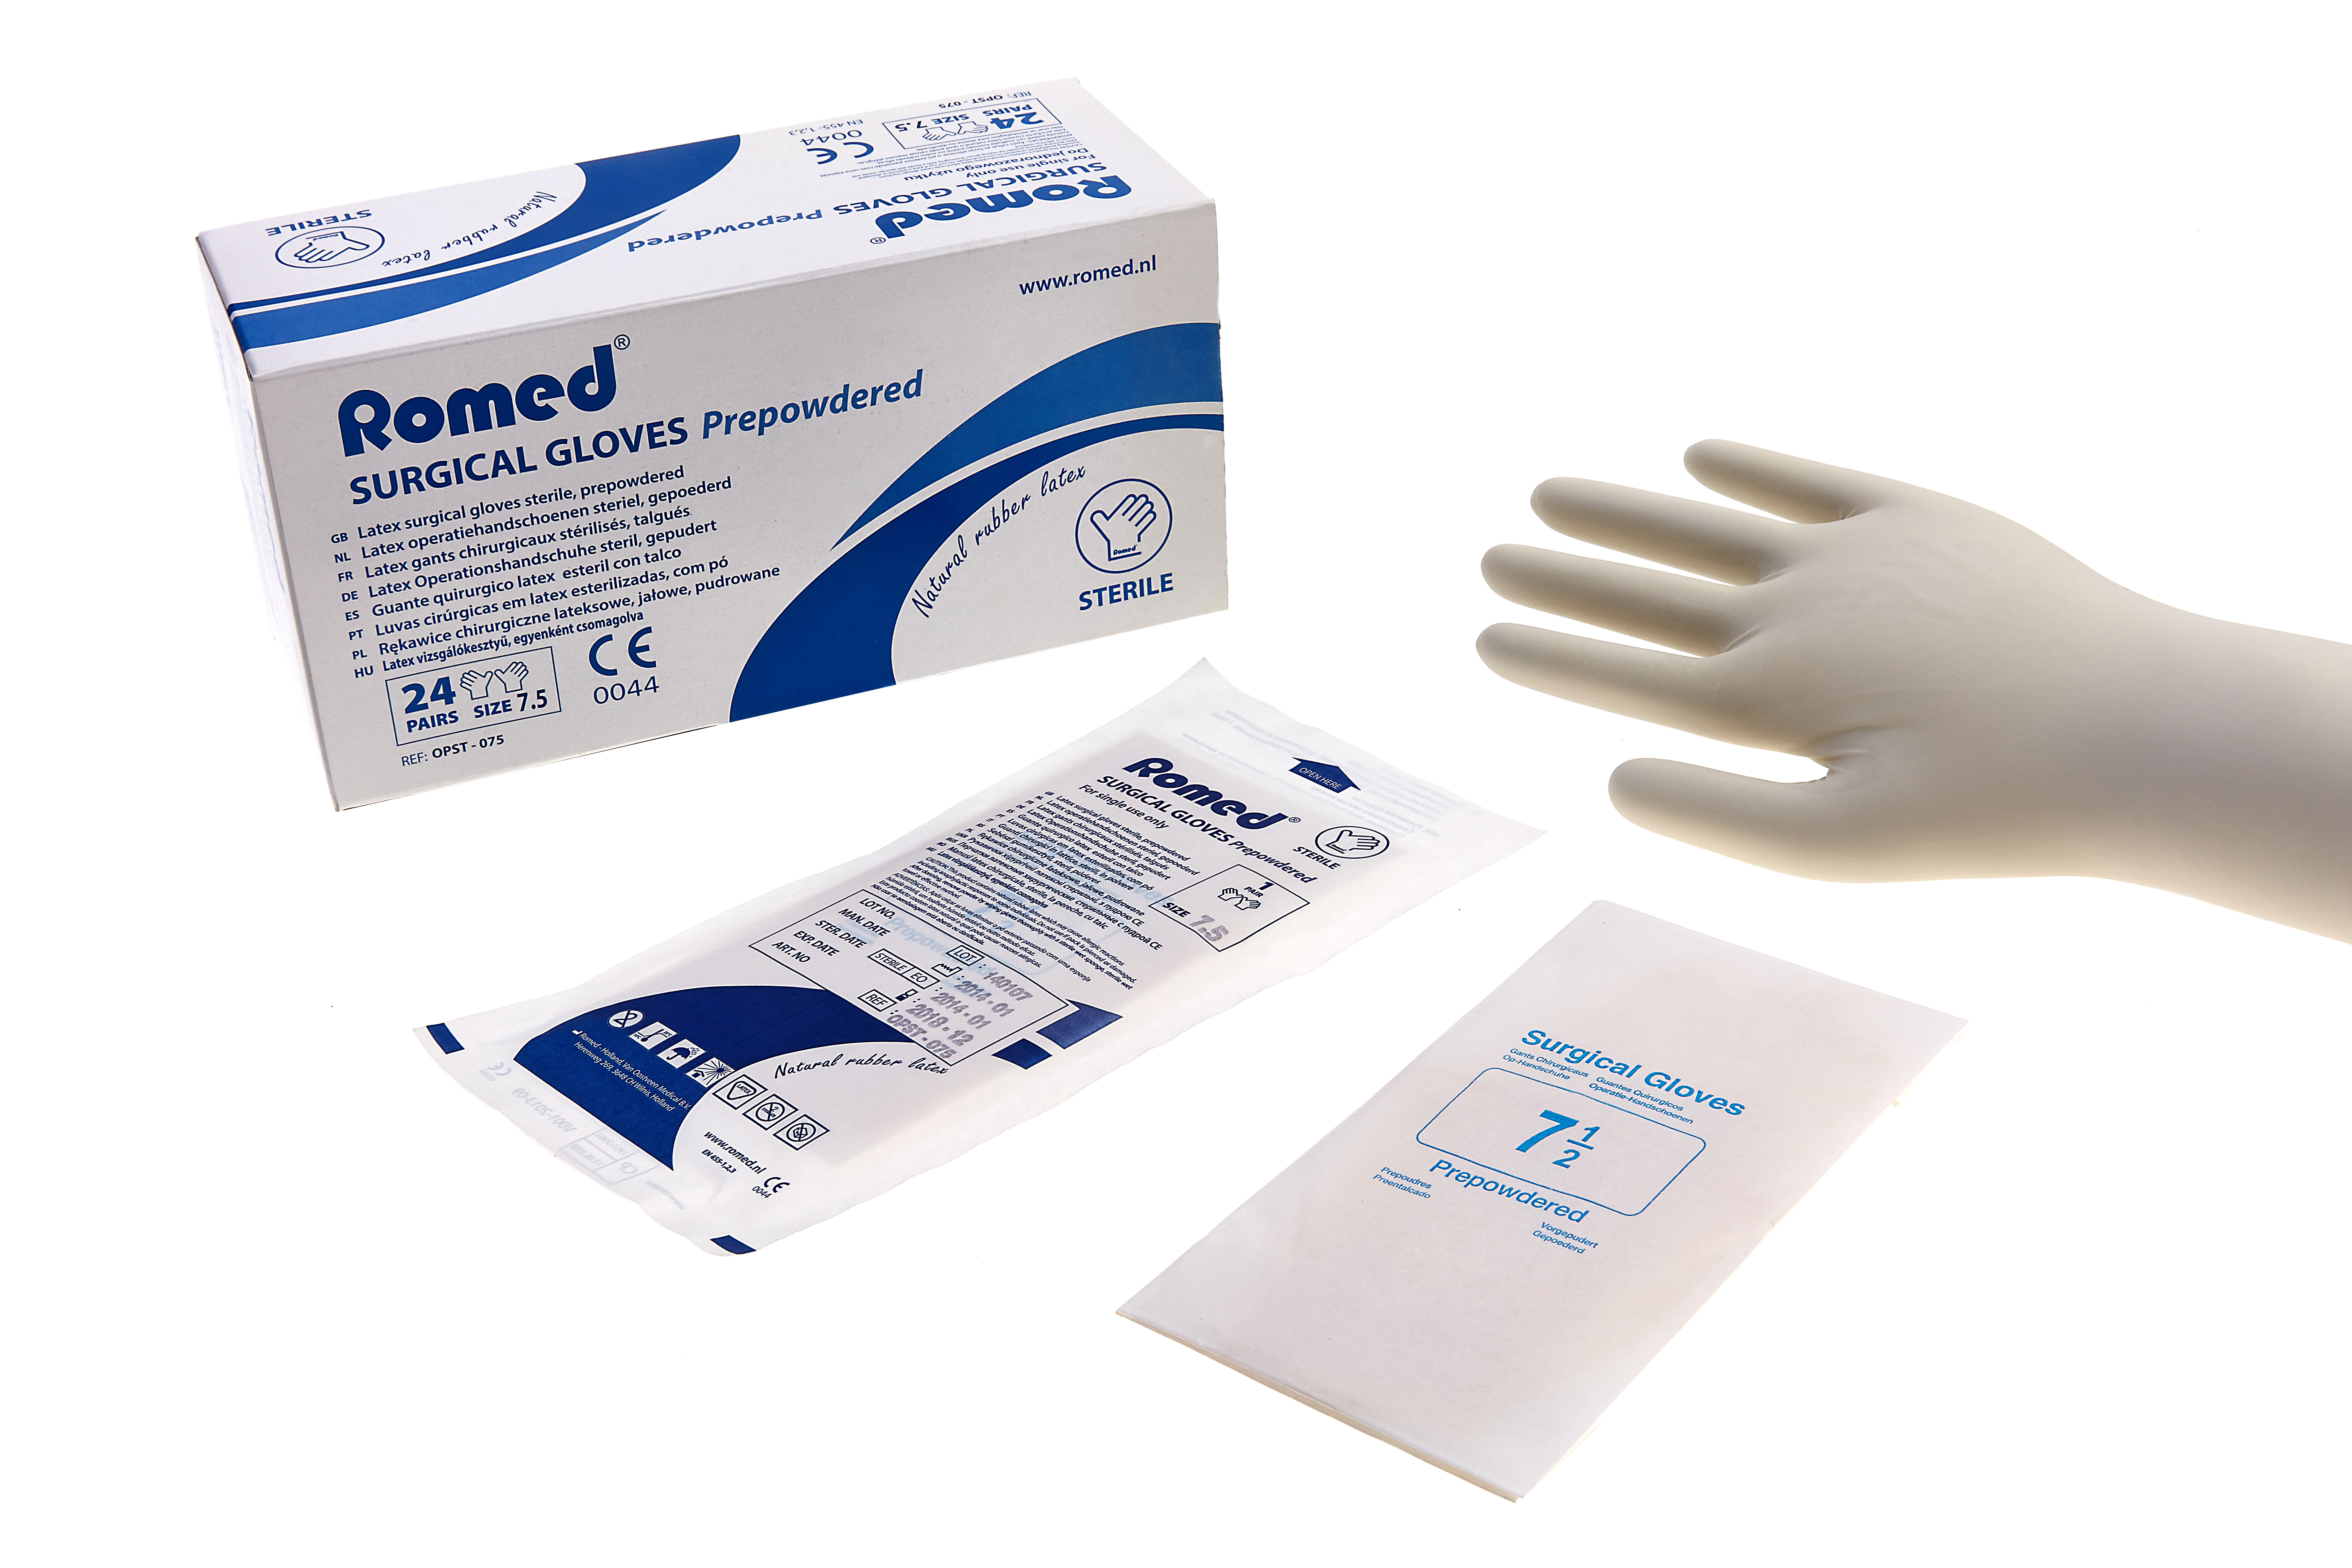 OPST070 Romed latex surgical gloves, prepowdered, size 7, sterile per pair, 50 pairs in an inner box, 8 x 50 pairs = 400 pairs in a carton.